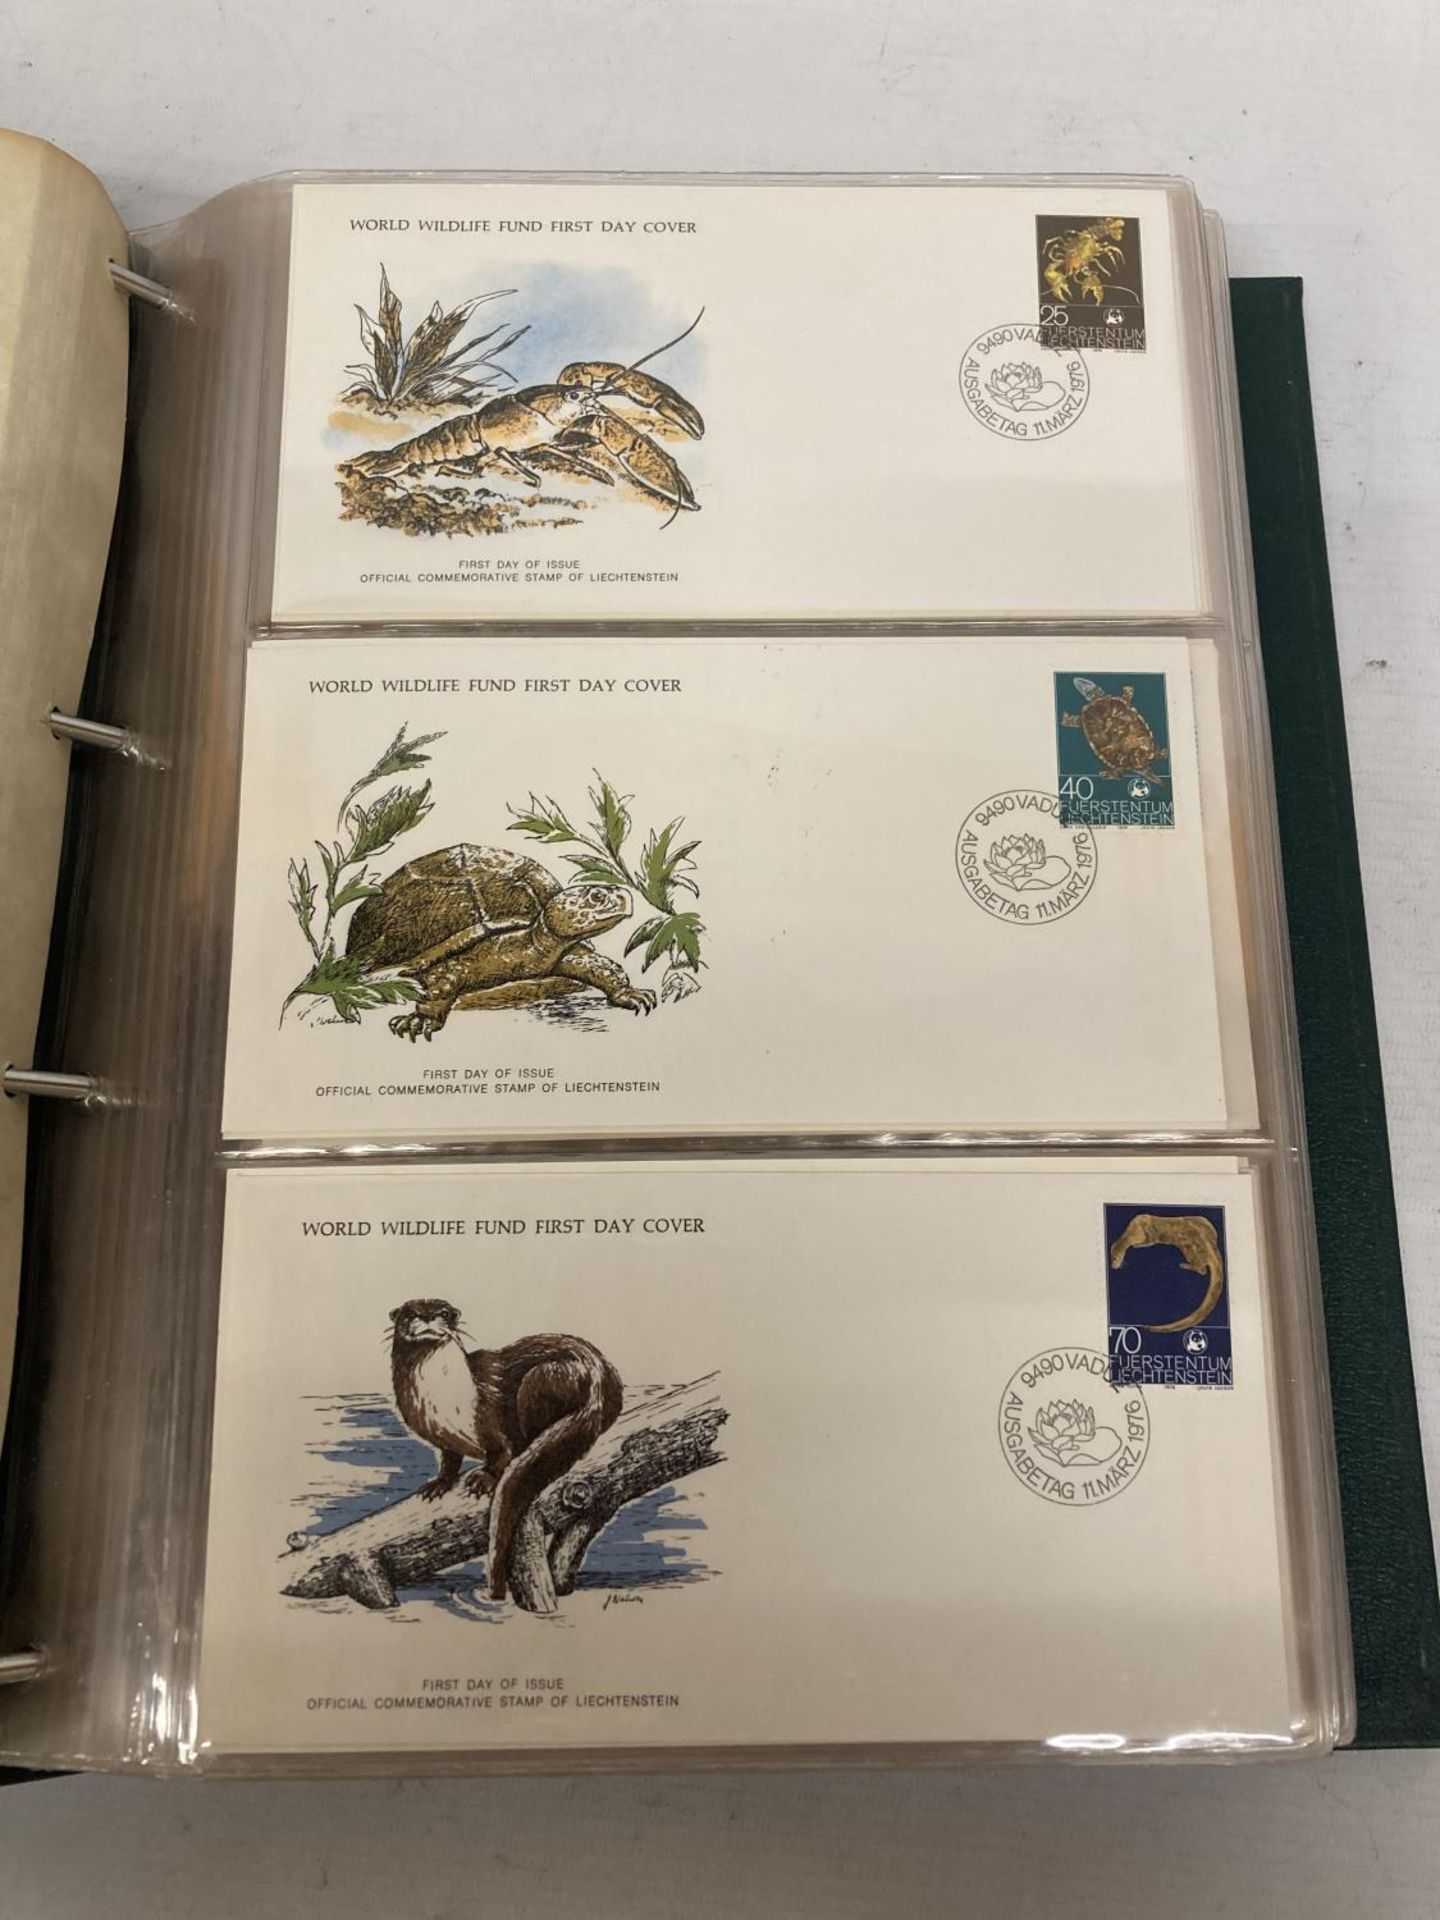 THE OFFICIAL COLLECTION OF WORLD WILDLIFE FDC’S - Image 2 of 7